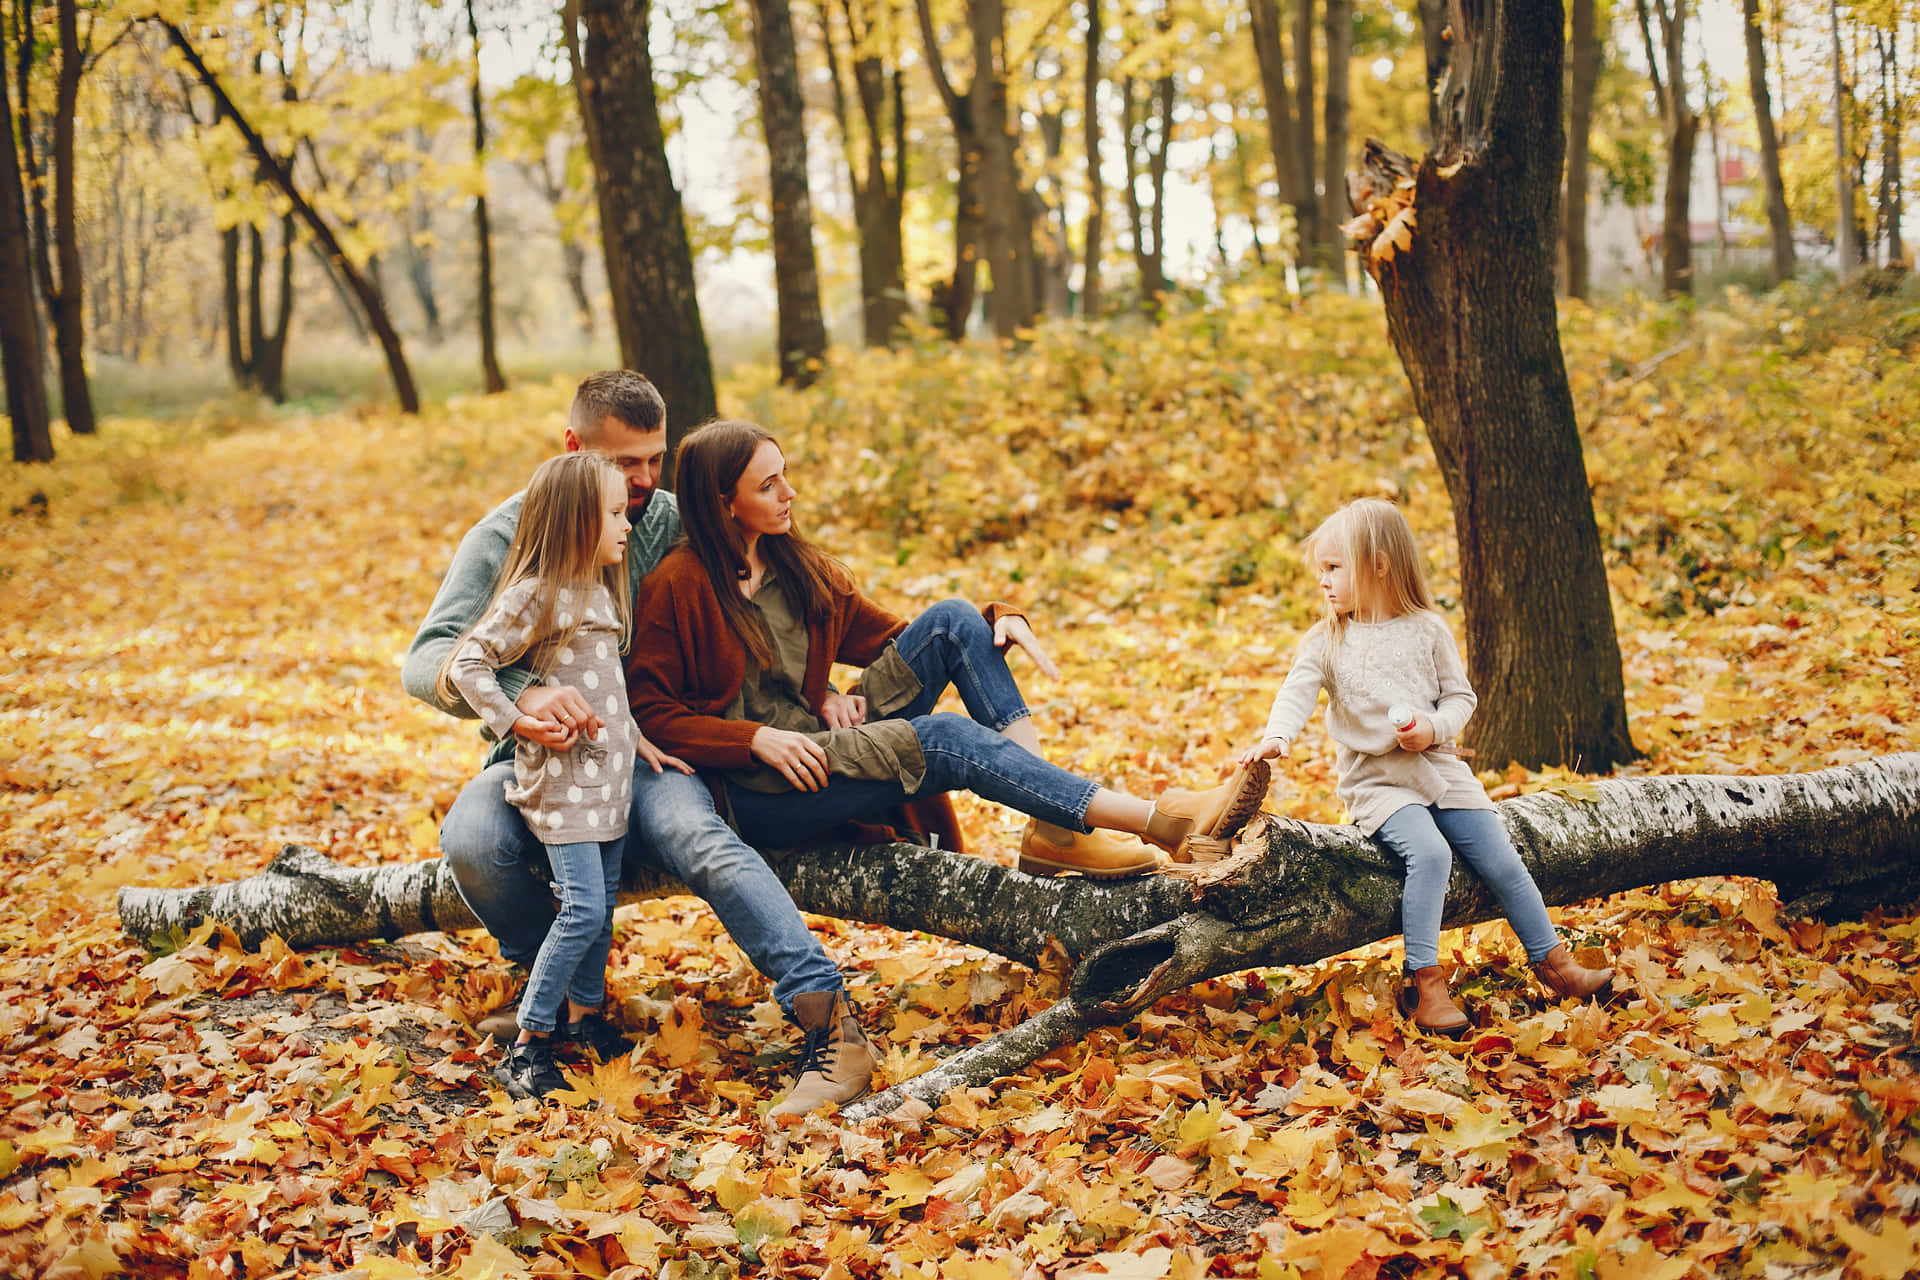 Spend quality time with family this Fall.